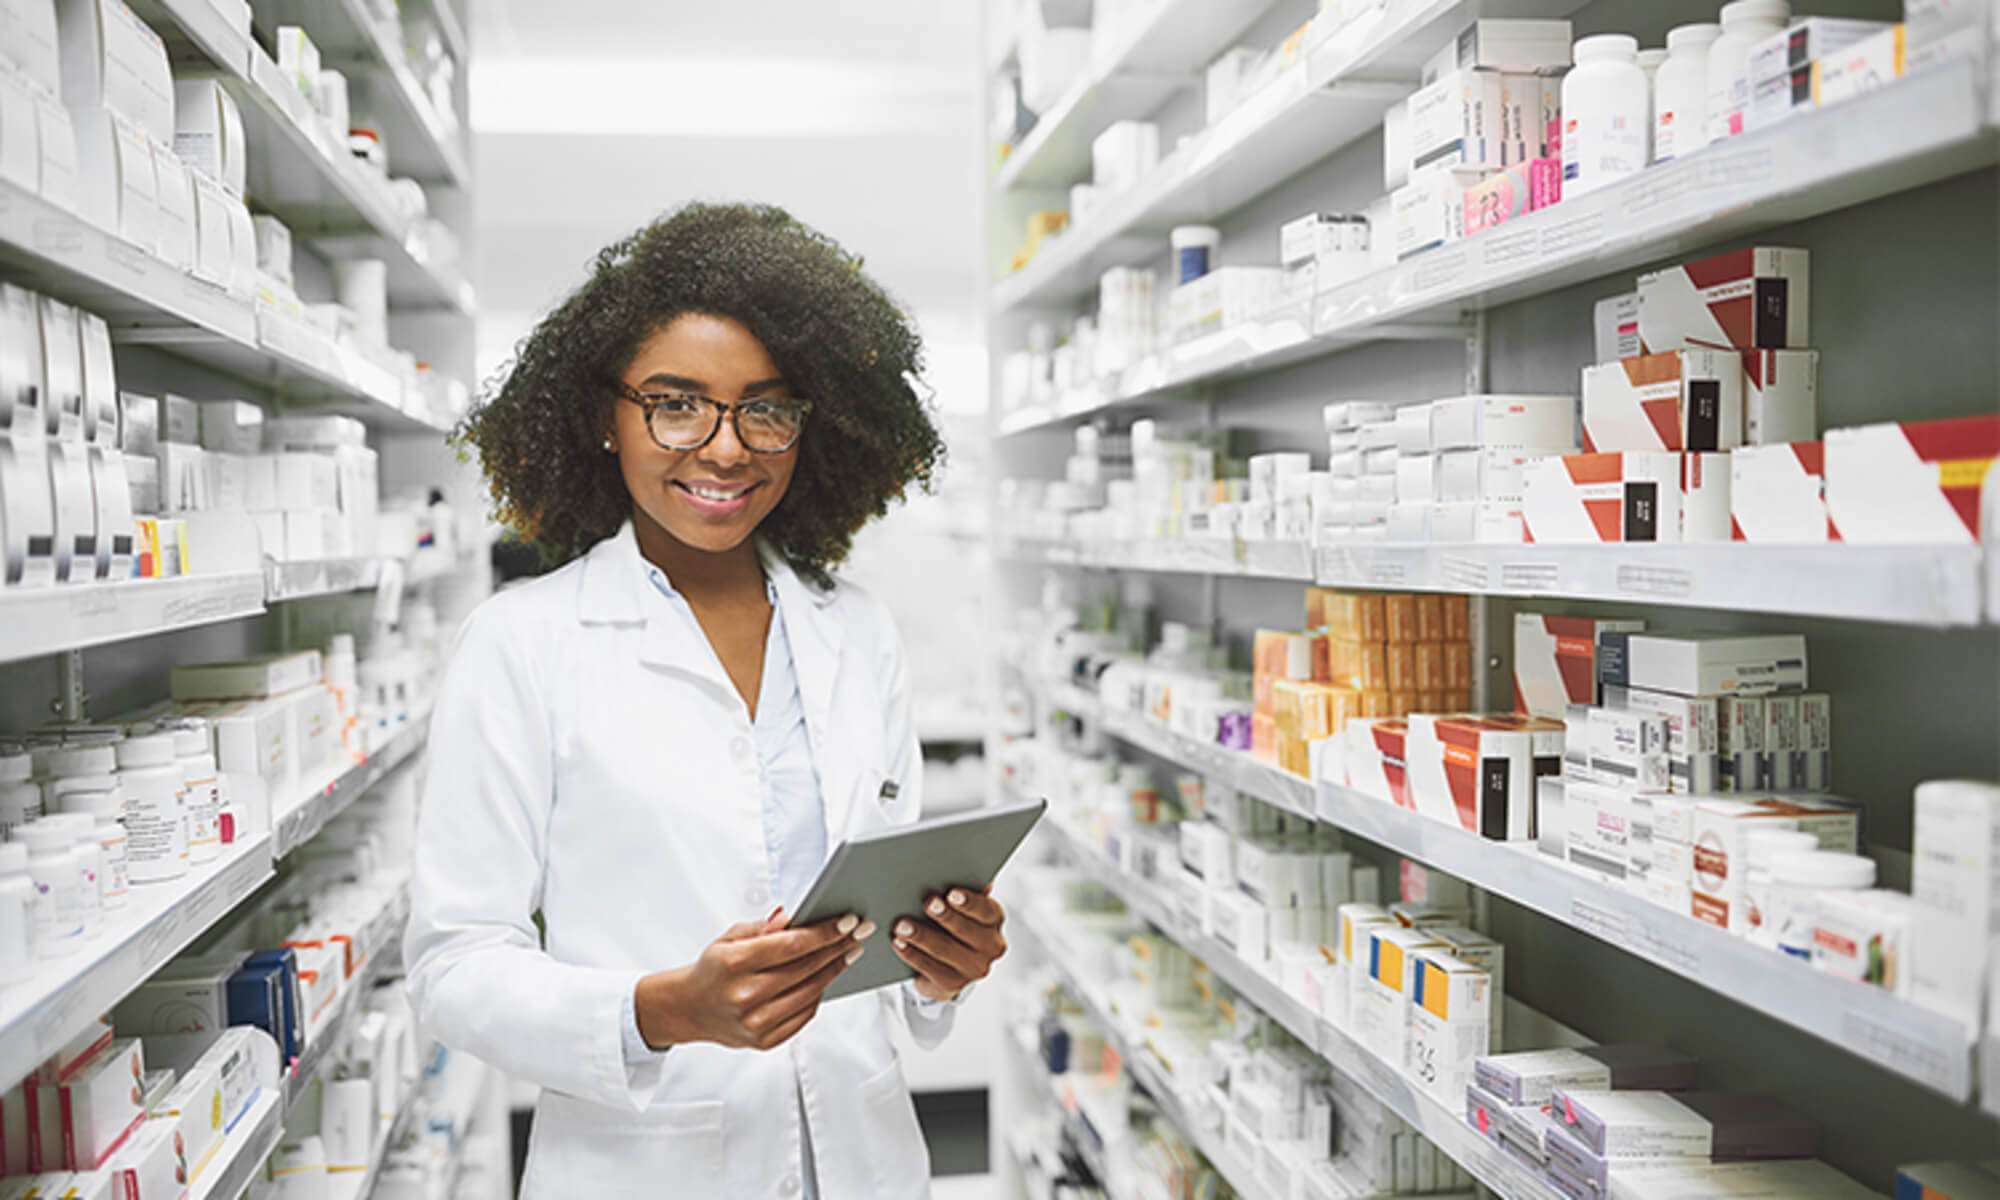 How To Become A Licensed Pharmacist in Canada